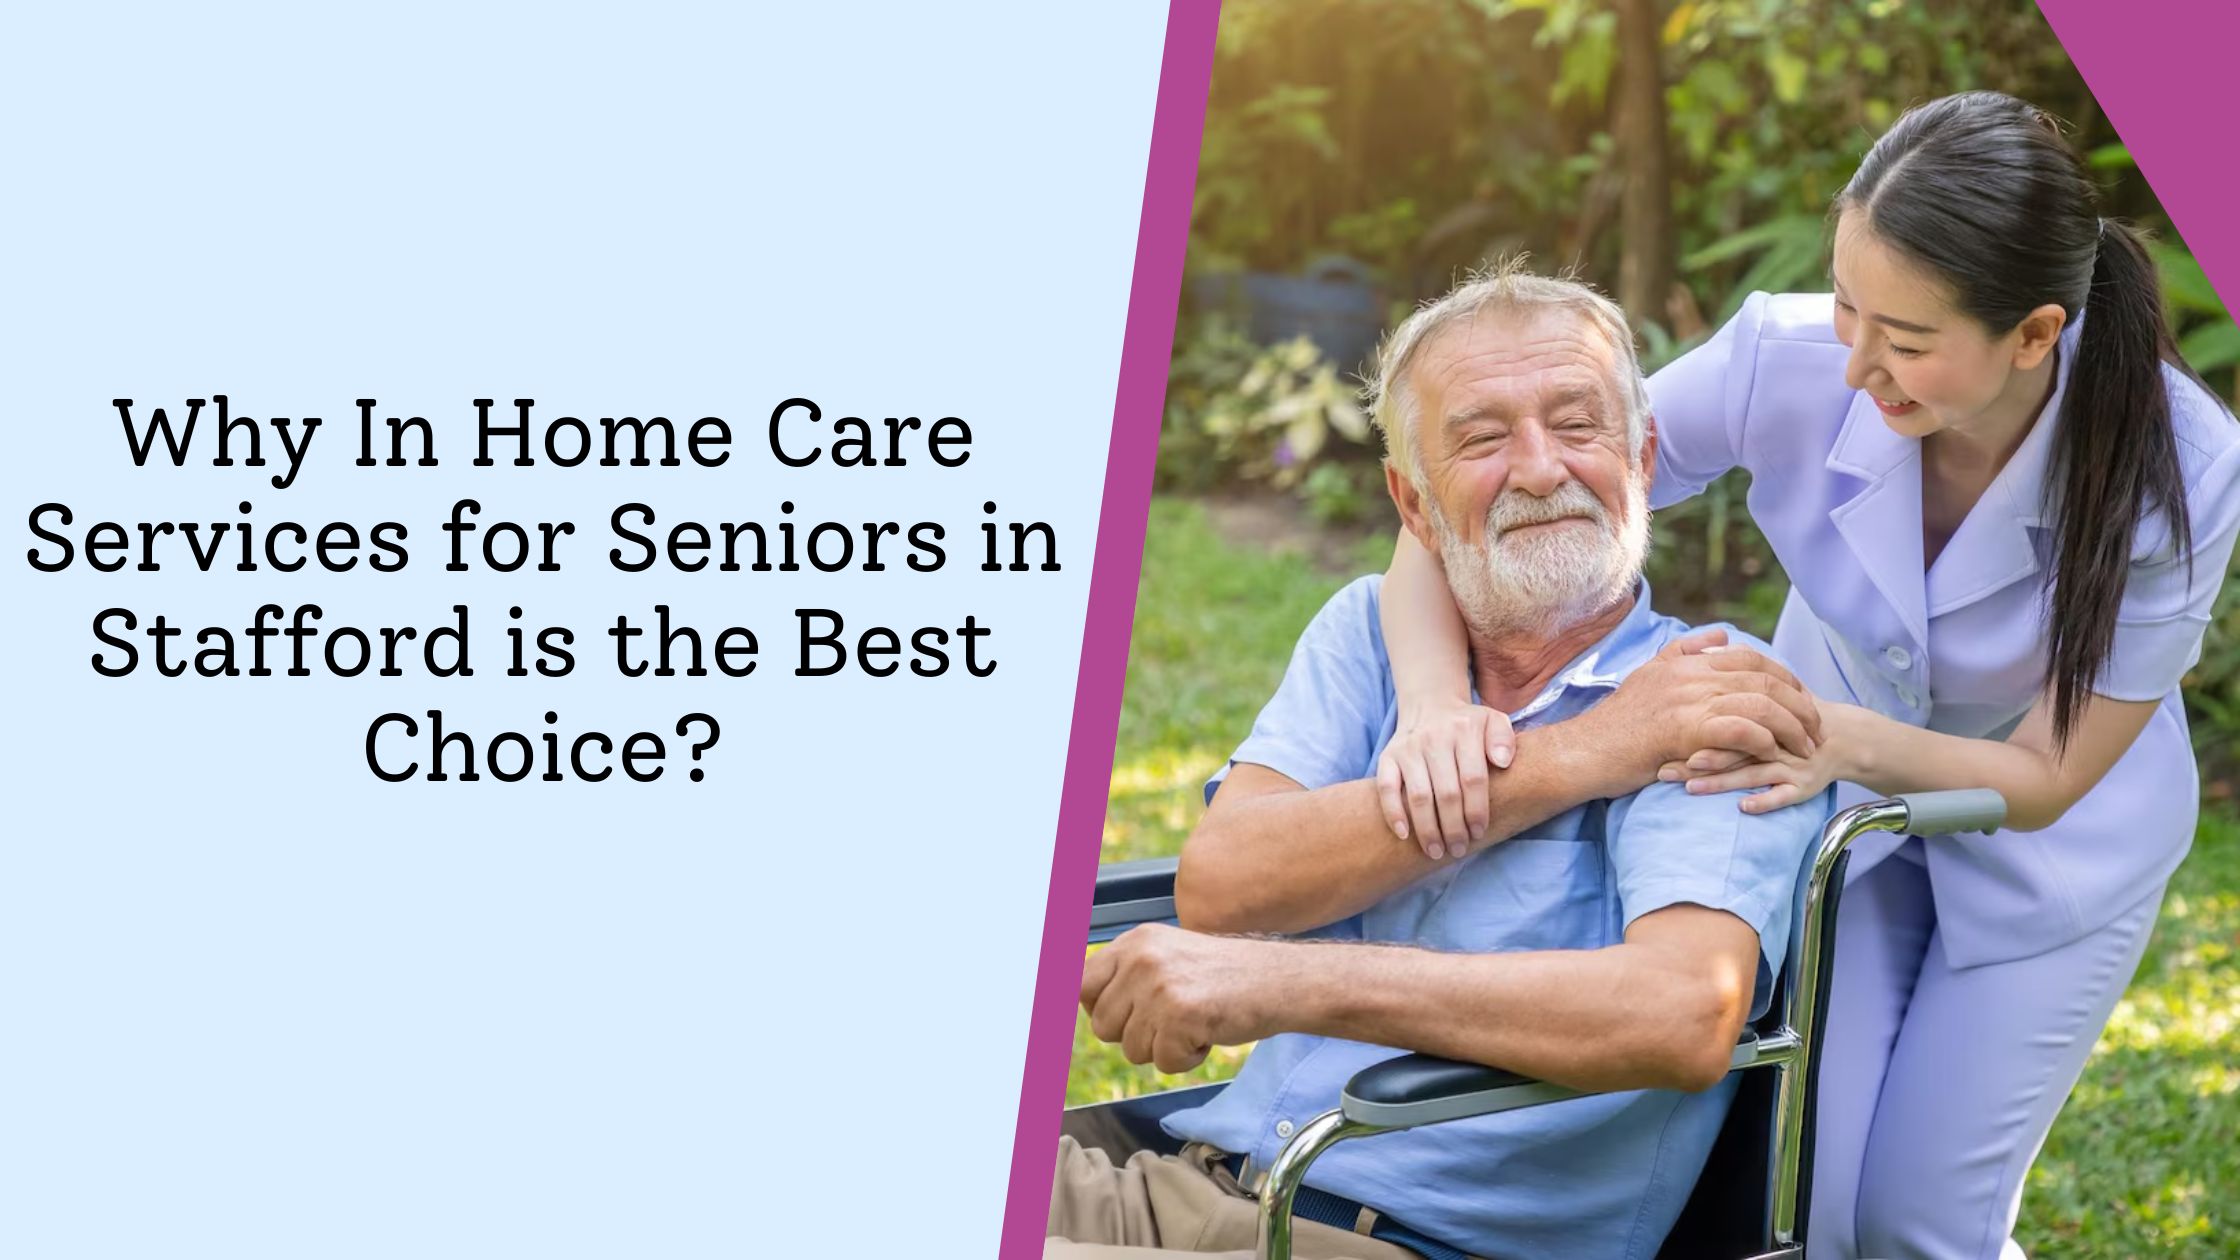 in home care services for seniors in Stafford